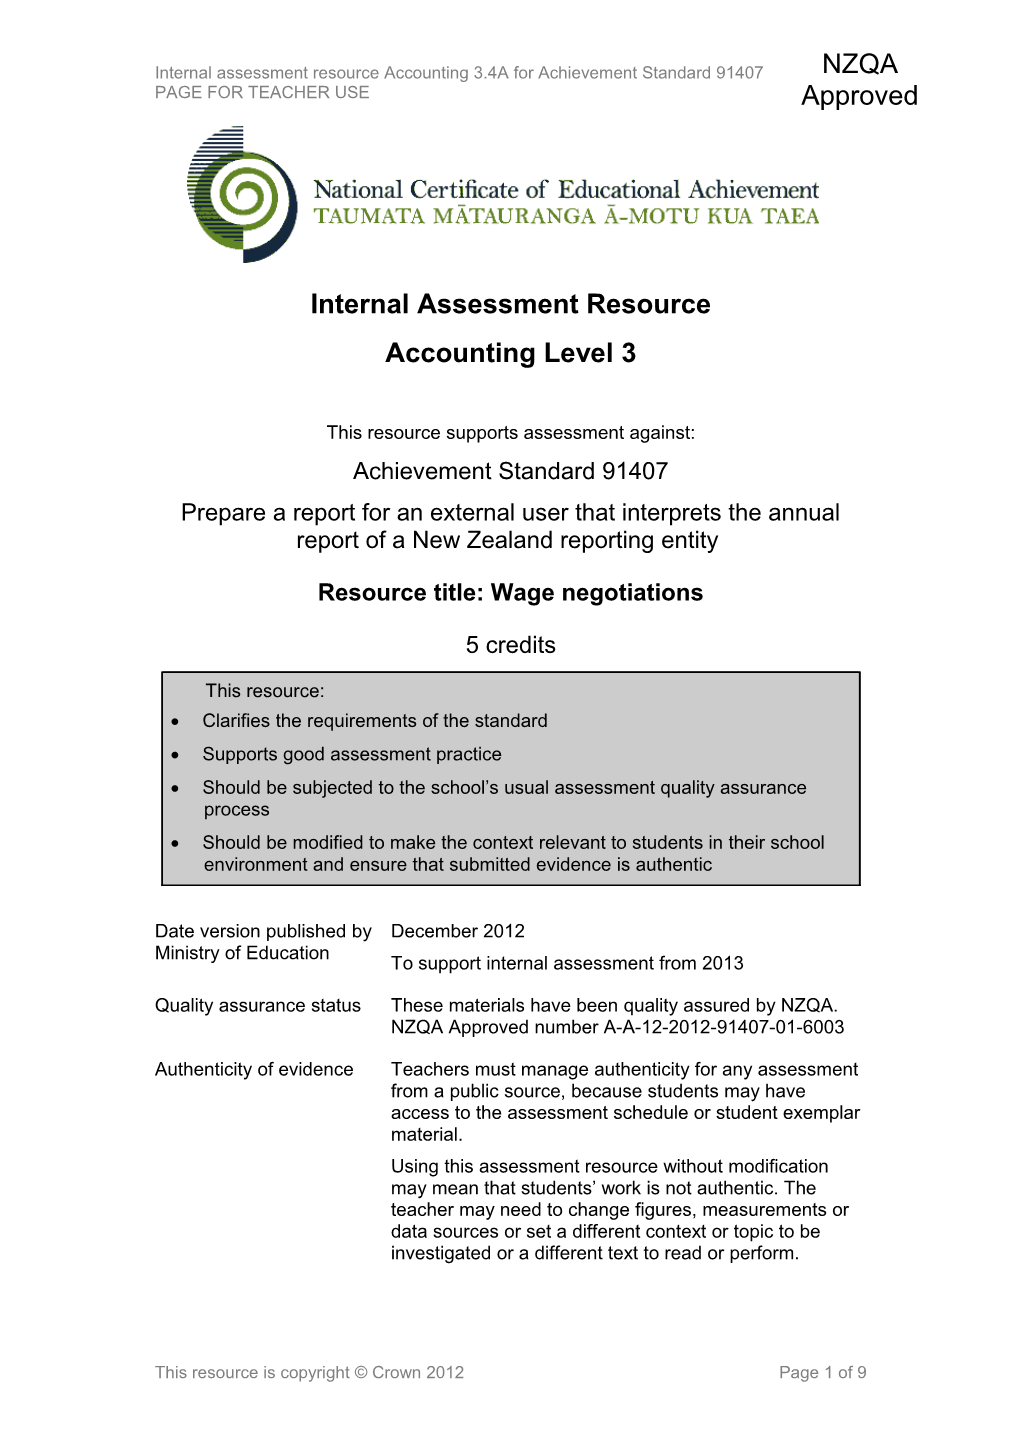 Level 3 Accounting Internal Assessment Resource